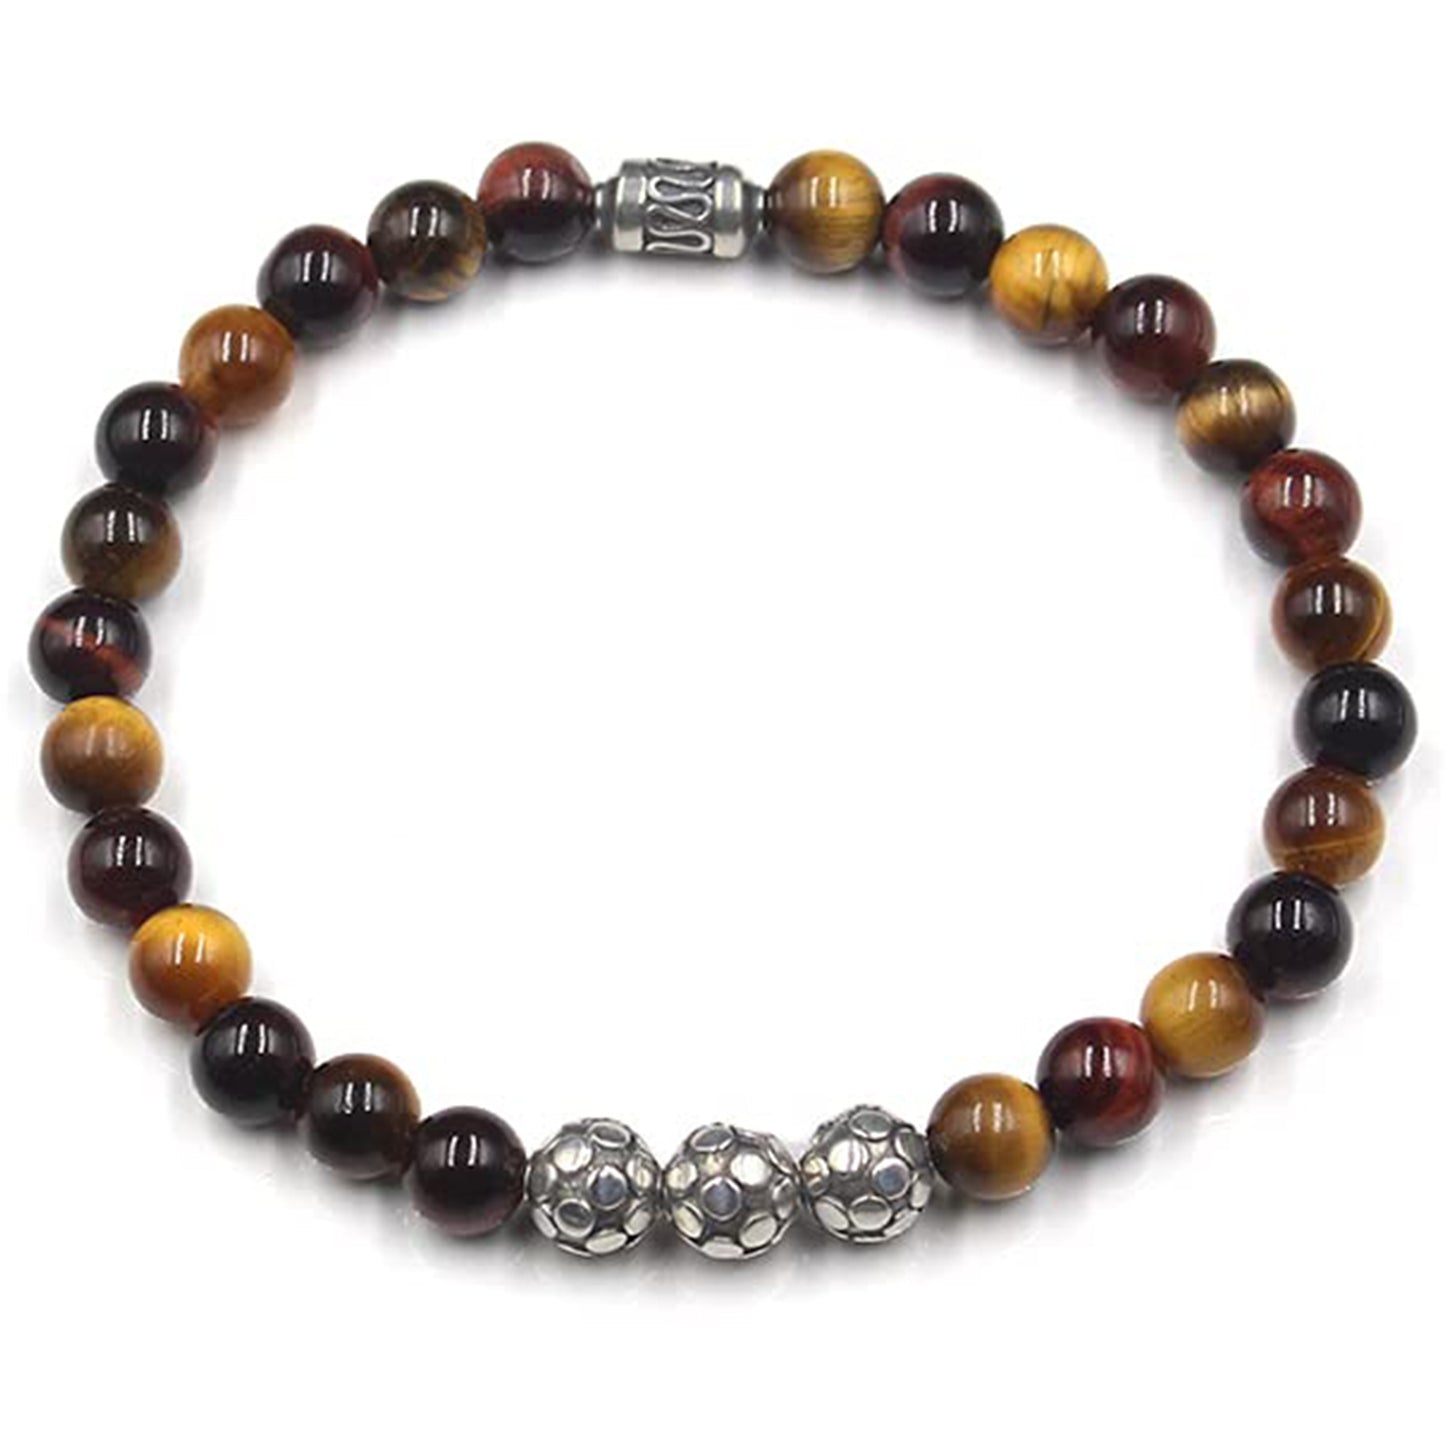 Mixed Tiger's Eye and Sterling Silver